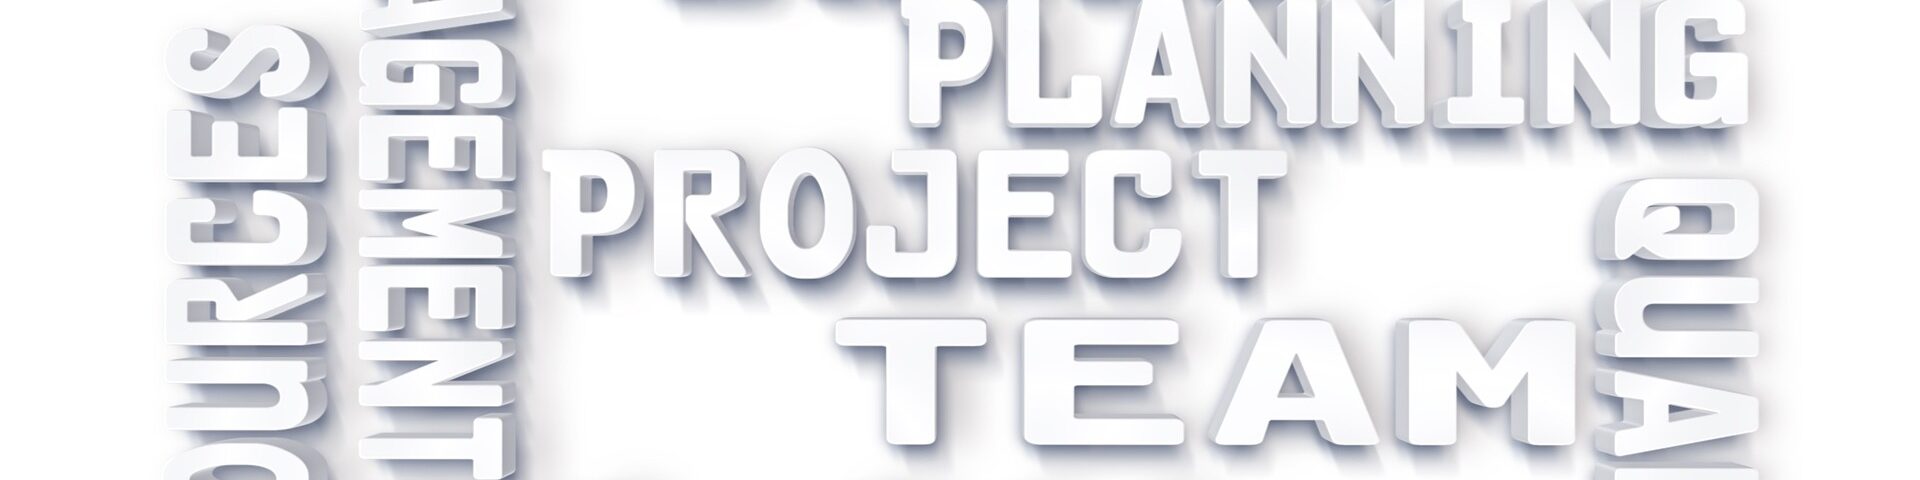 Develop, implement and evaluate a project plan